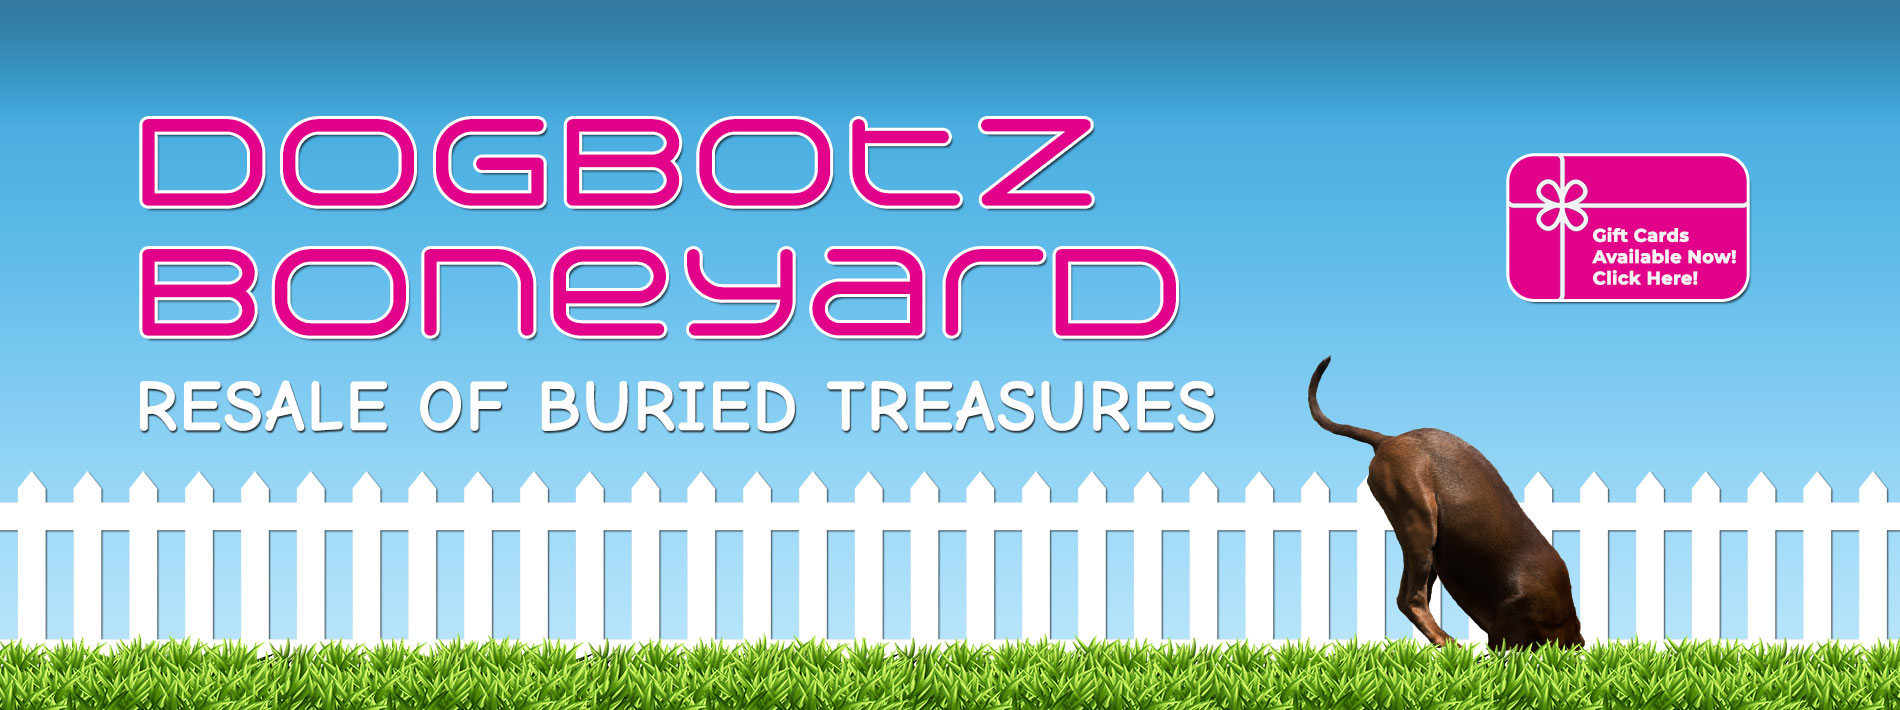 Dogbotz Boneyard - Gift Cards Available Now! Click Here!